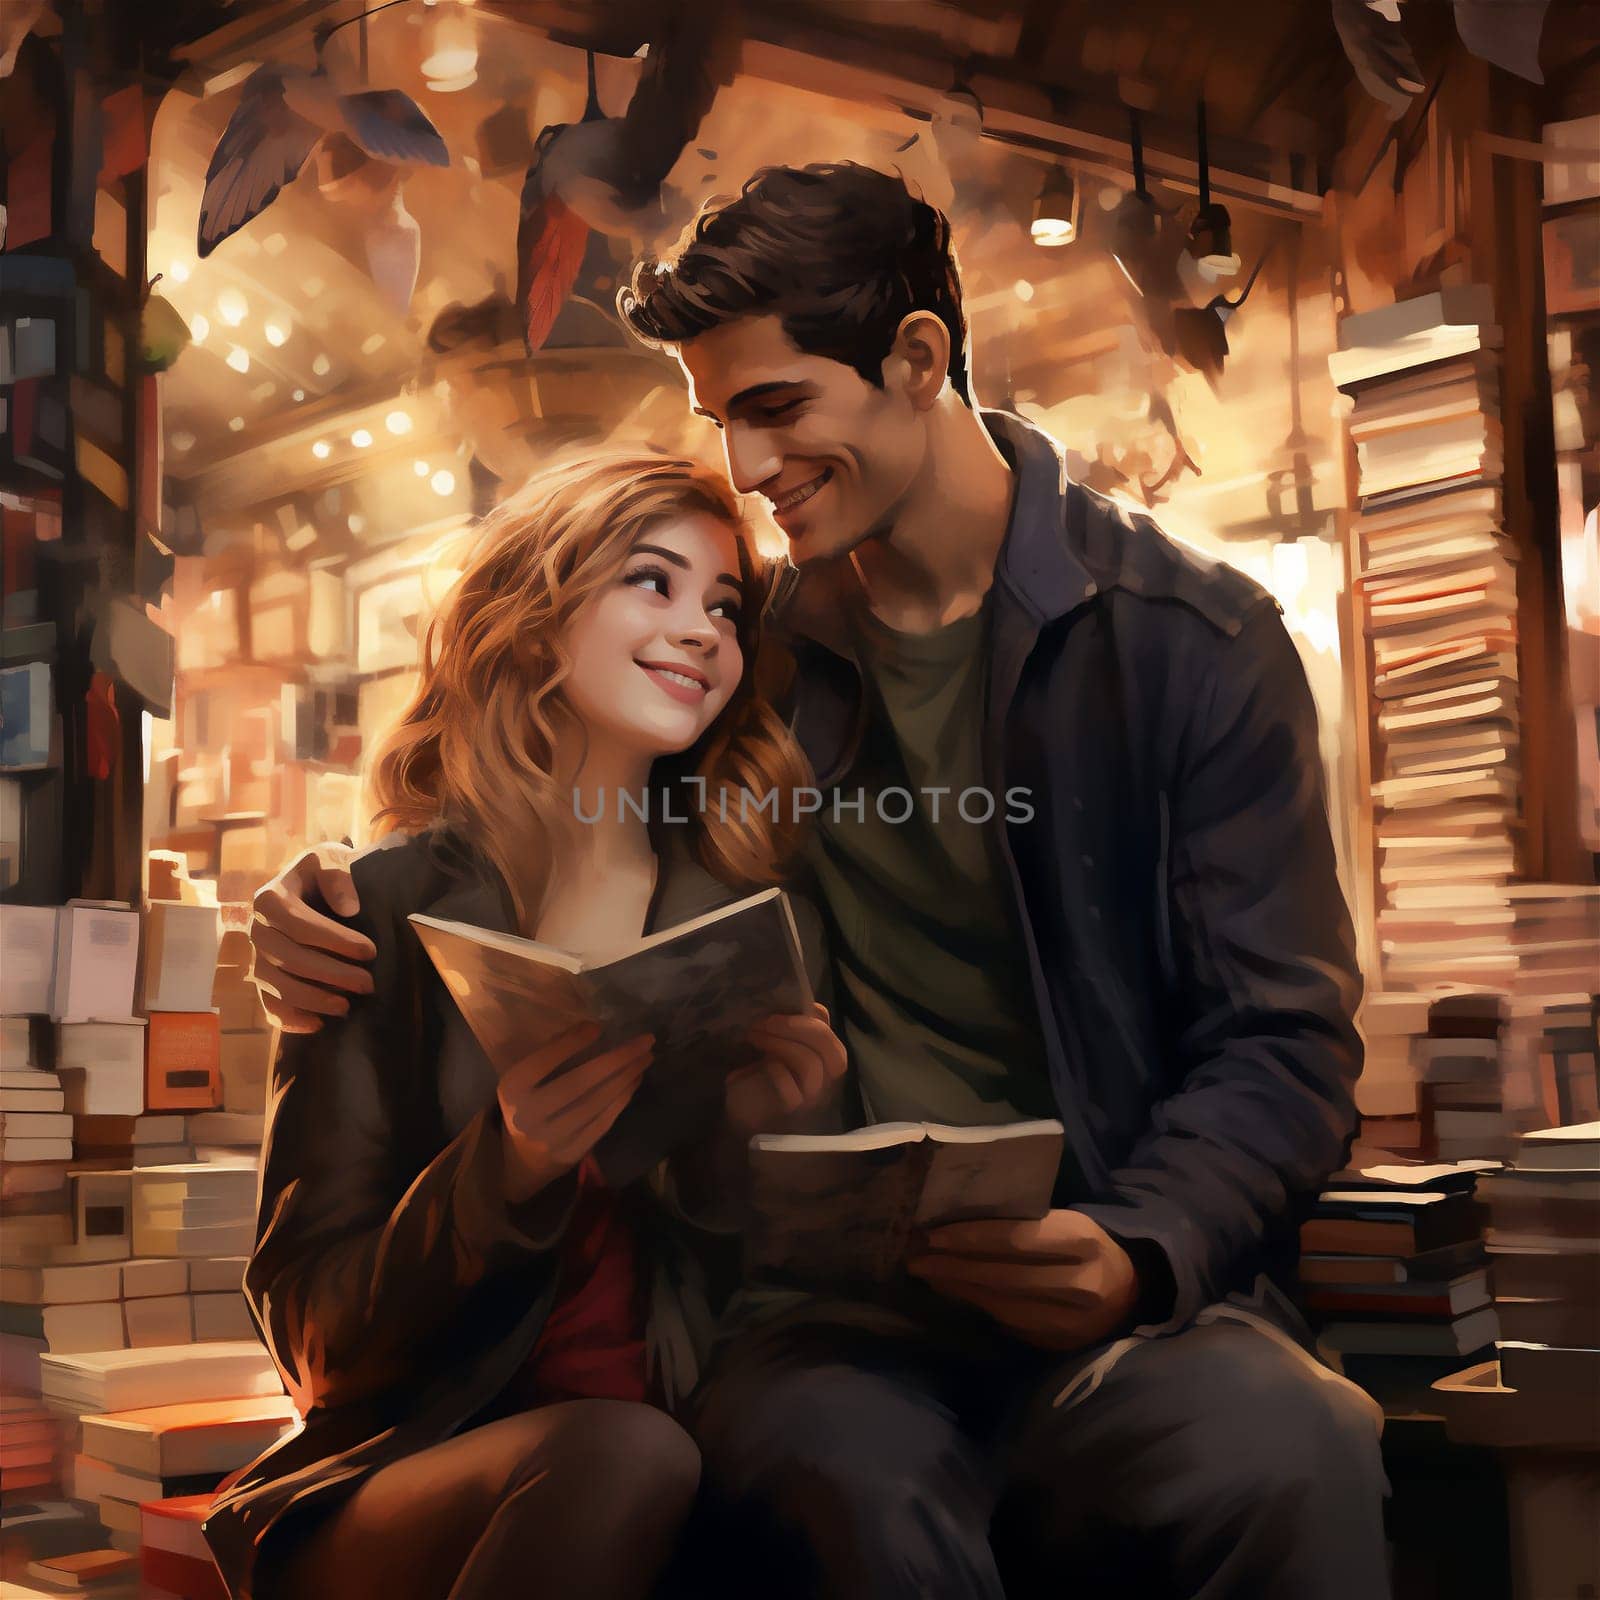 Beautiful and artistic digital painting of couple reading books in a cozy bookstore. The background is full of bookshelves and lights, creating cozy and inviting atmosphere with warm and romantic mood